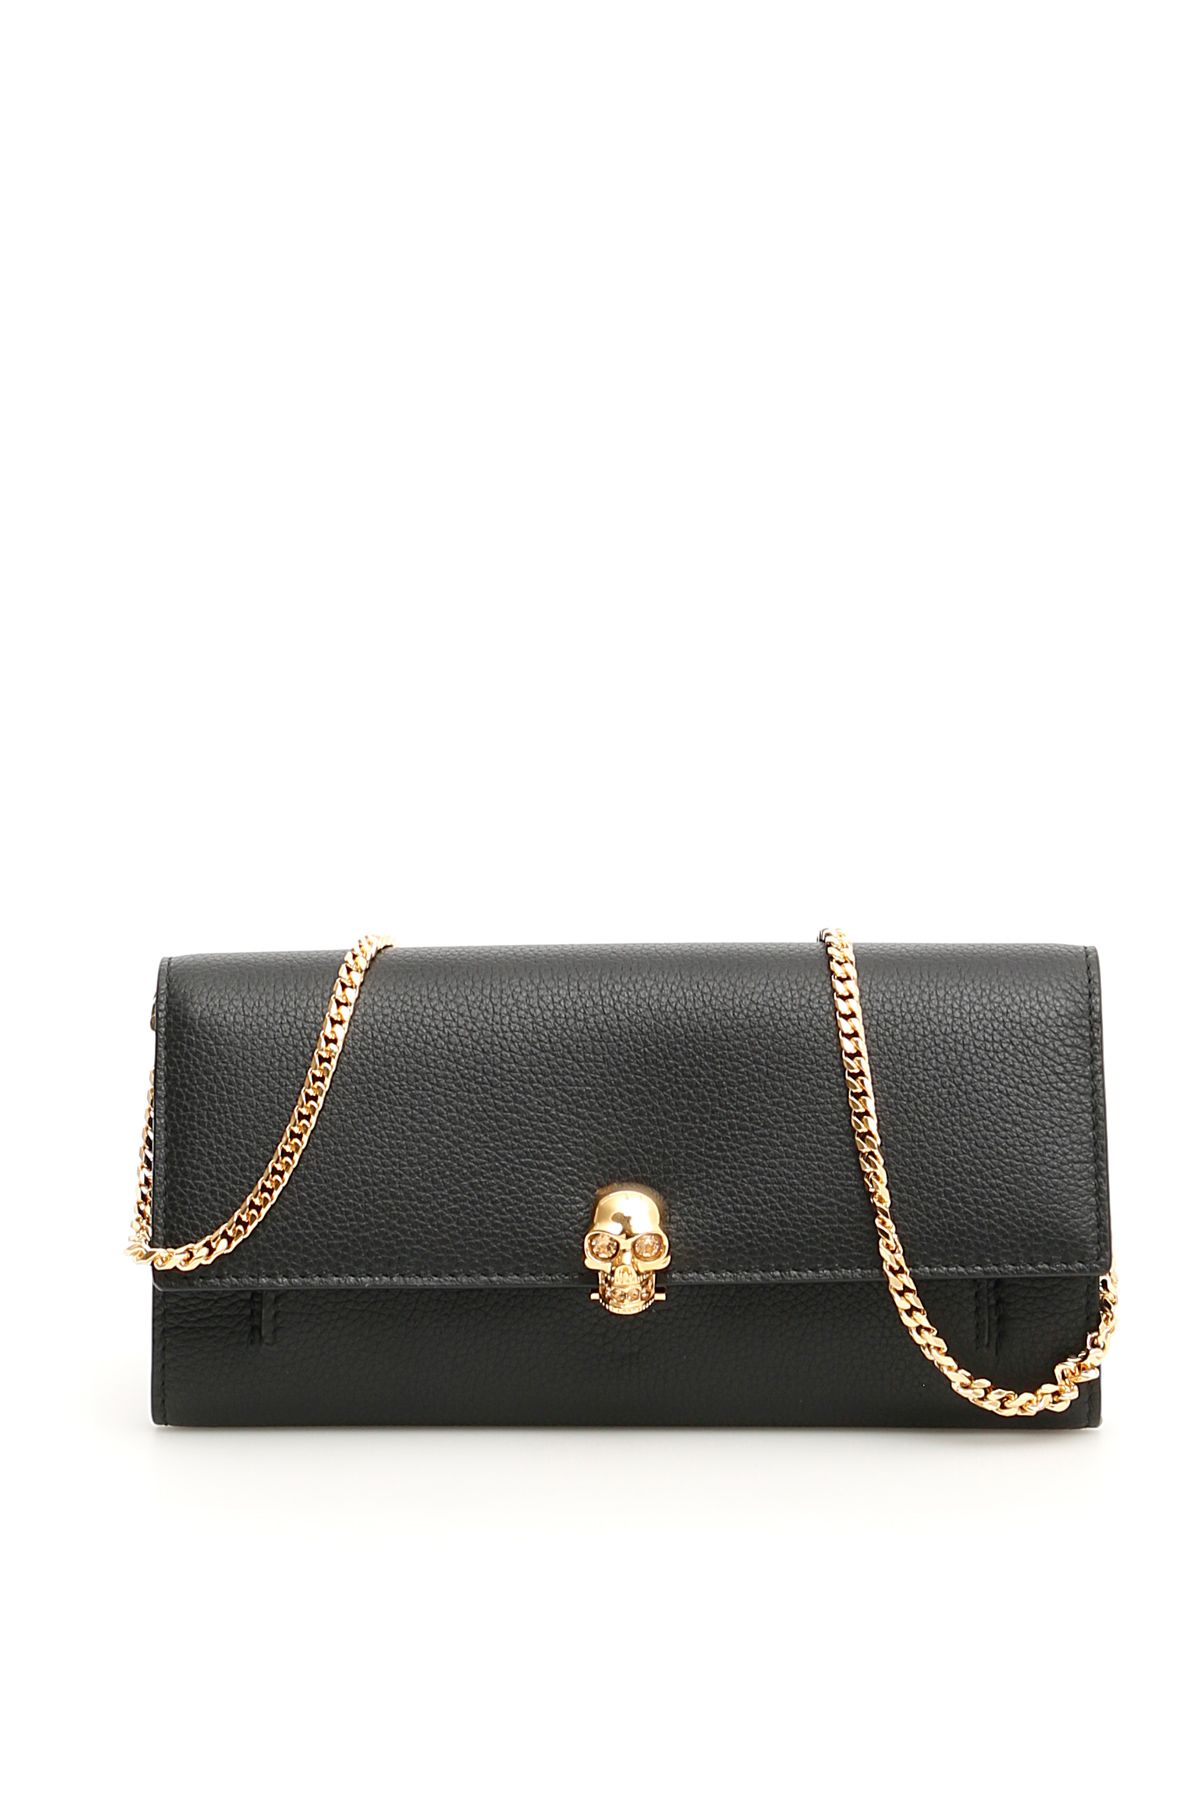 Alexander McQueen - Mini Skull Buckle Clutch | ABOUT ICONS